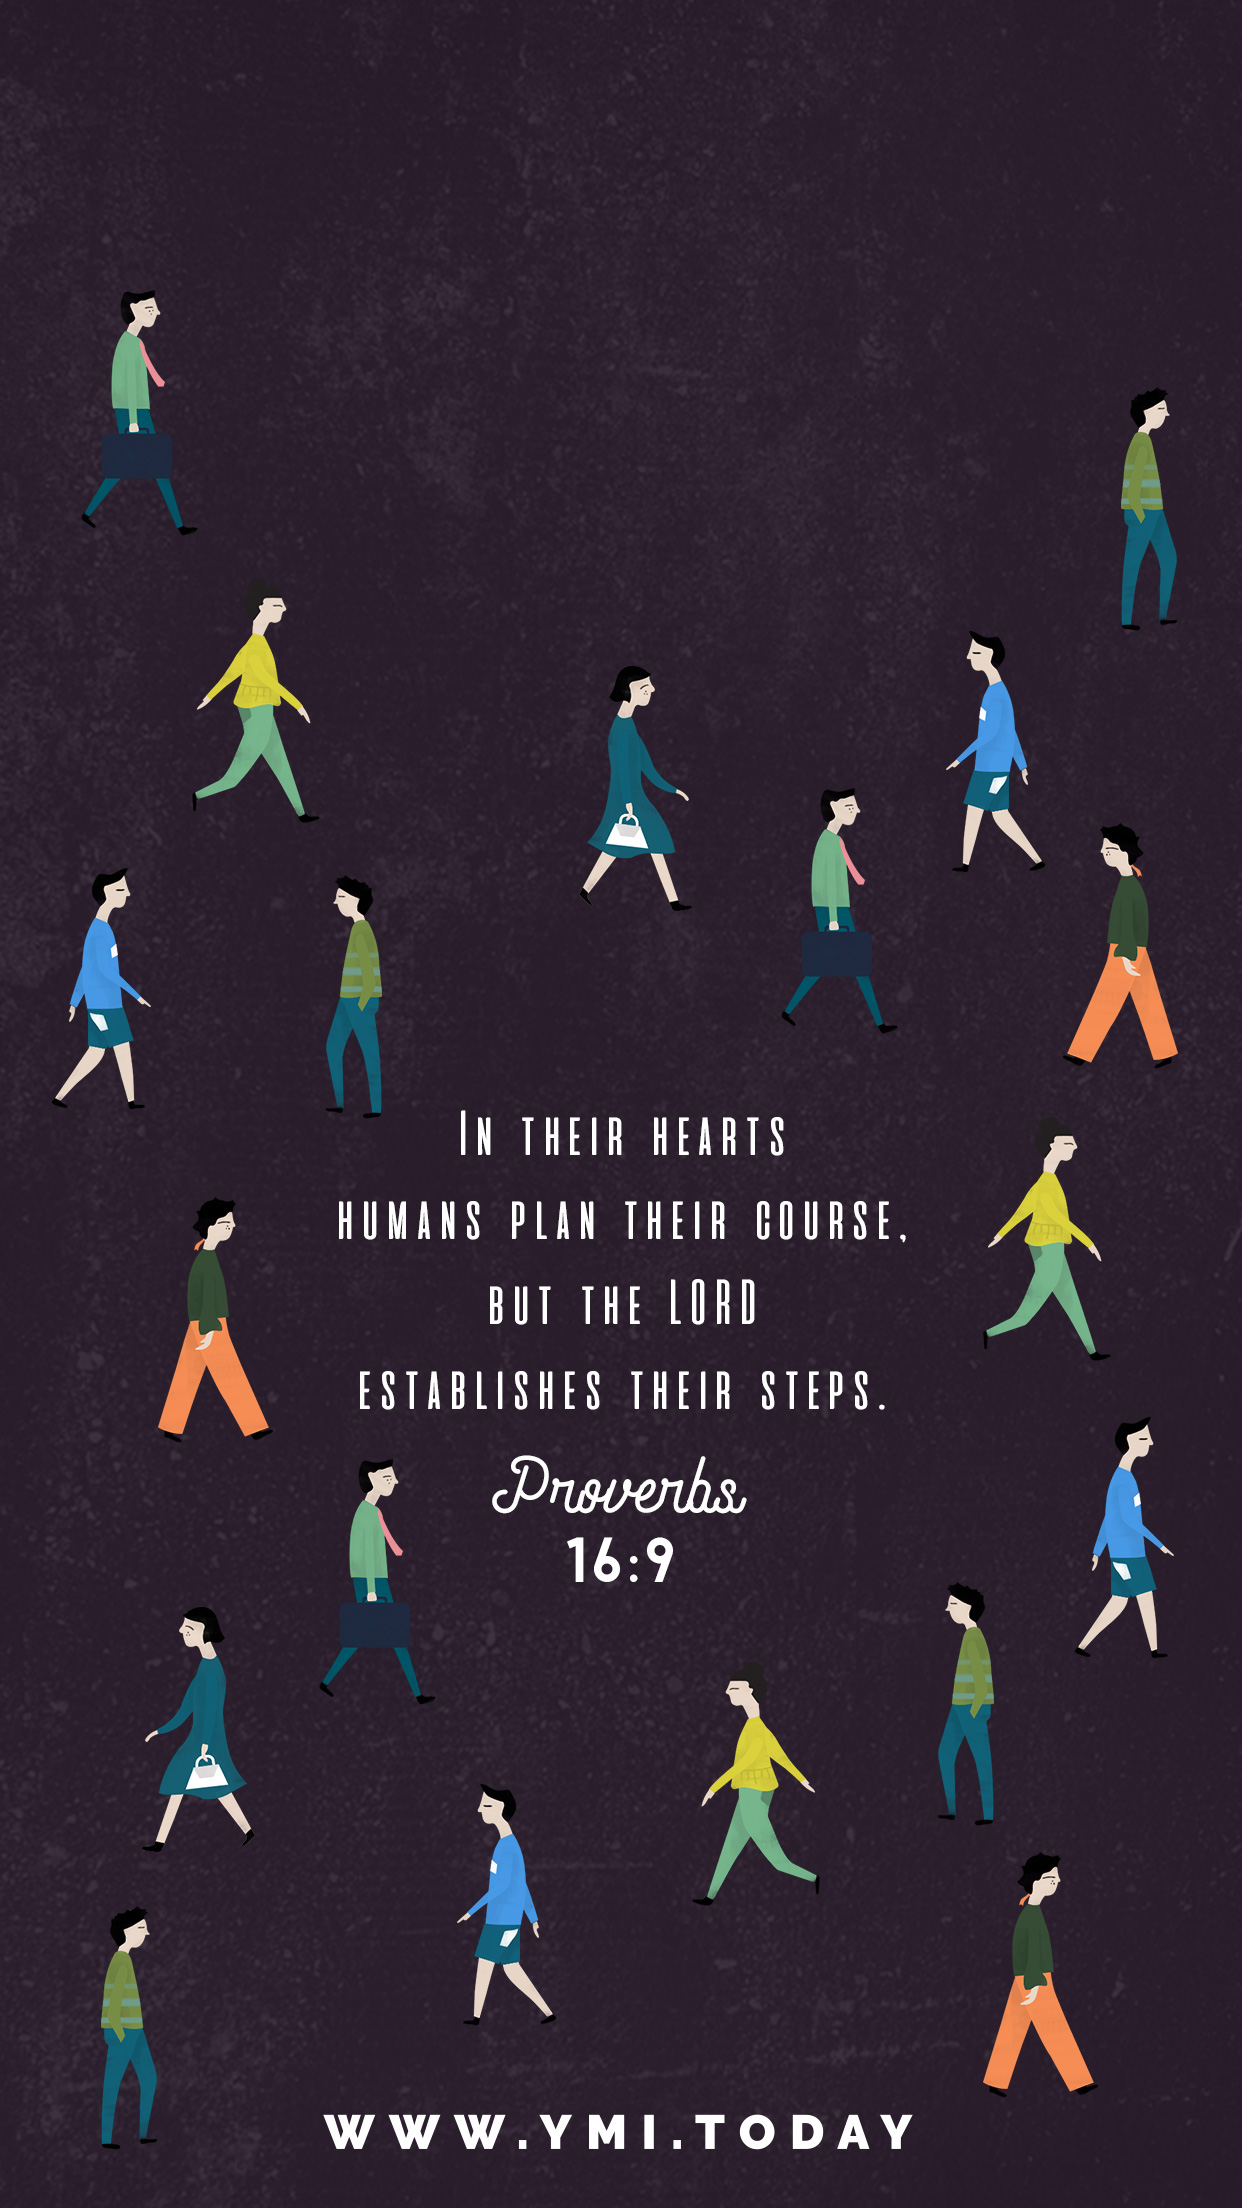 YMI August 2017 Phone Lockscreen - In their hearts humans plan their course. But the Lord establishes their steps. - Proverbs 16:9